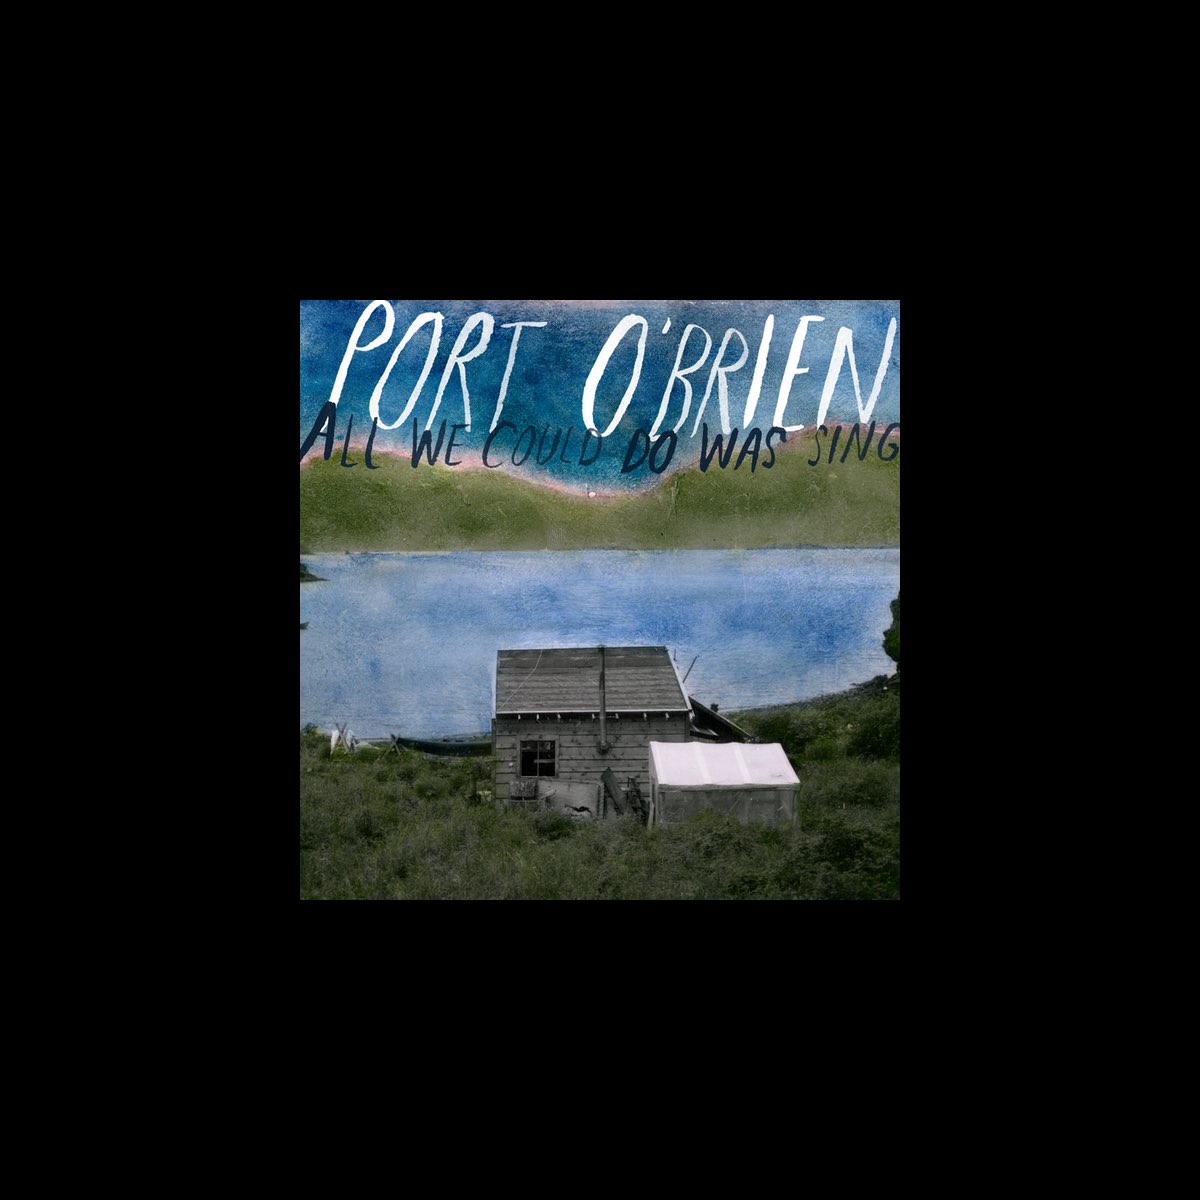 All We Could Do Was Sing - Album by Port O'Brien - Apple Music